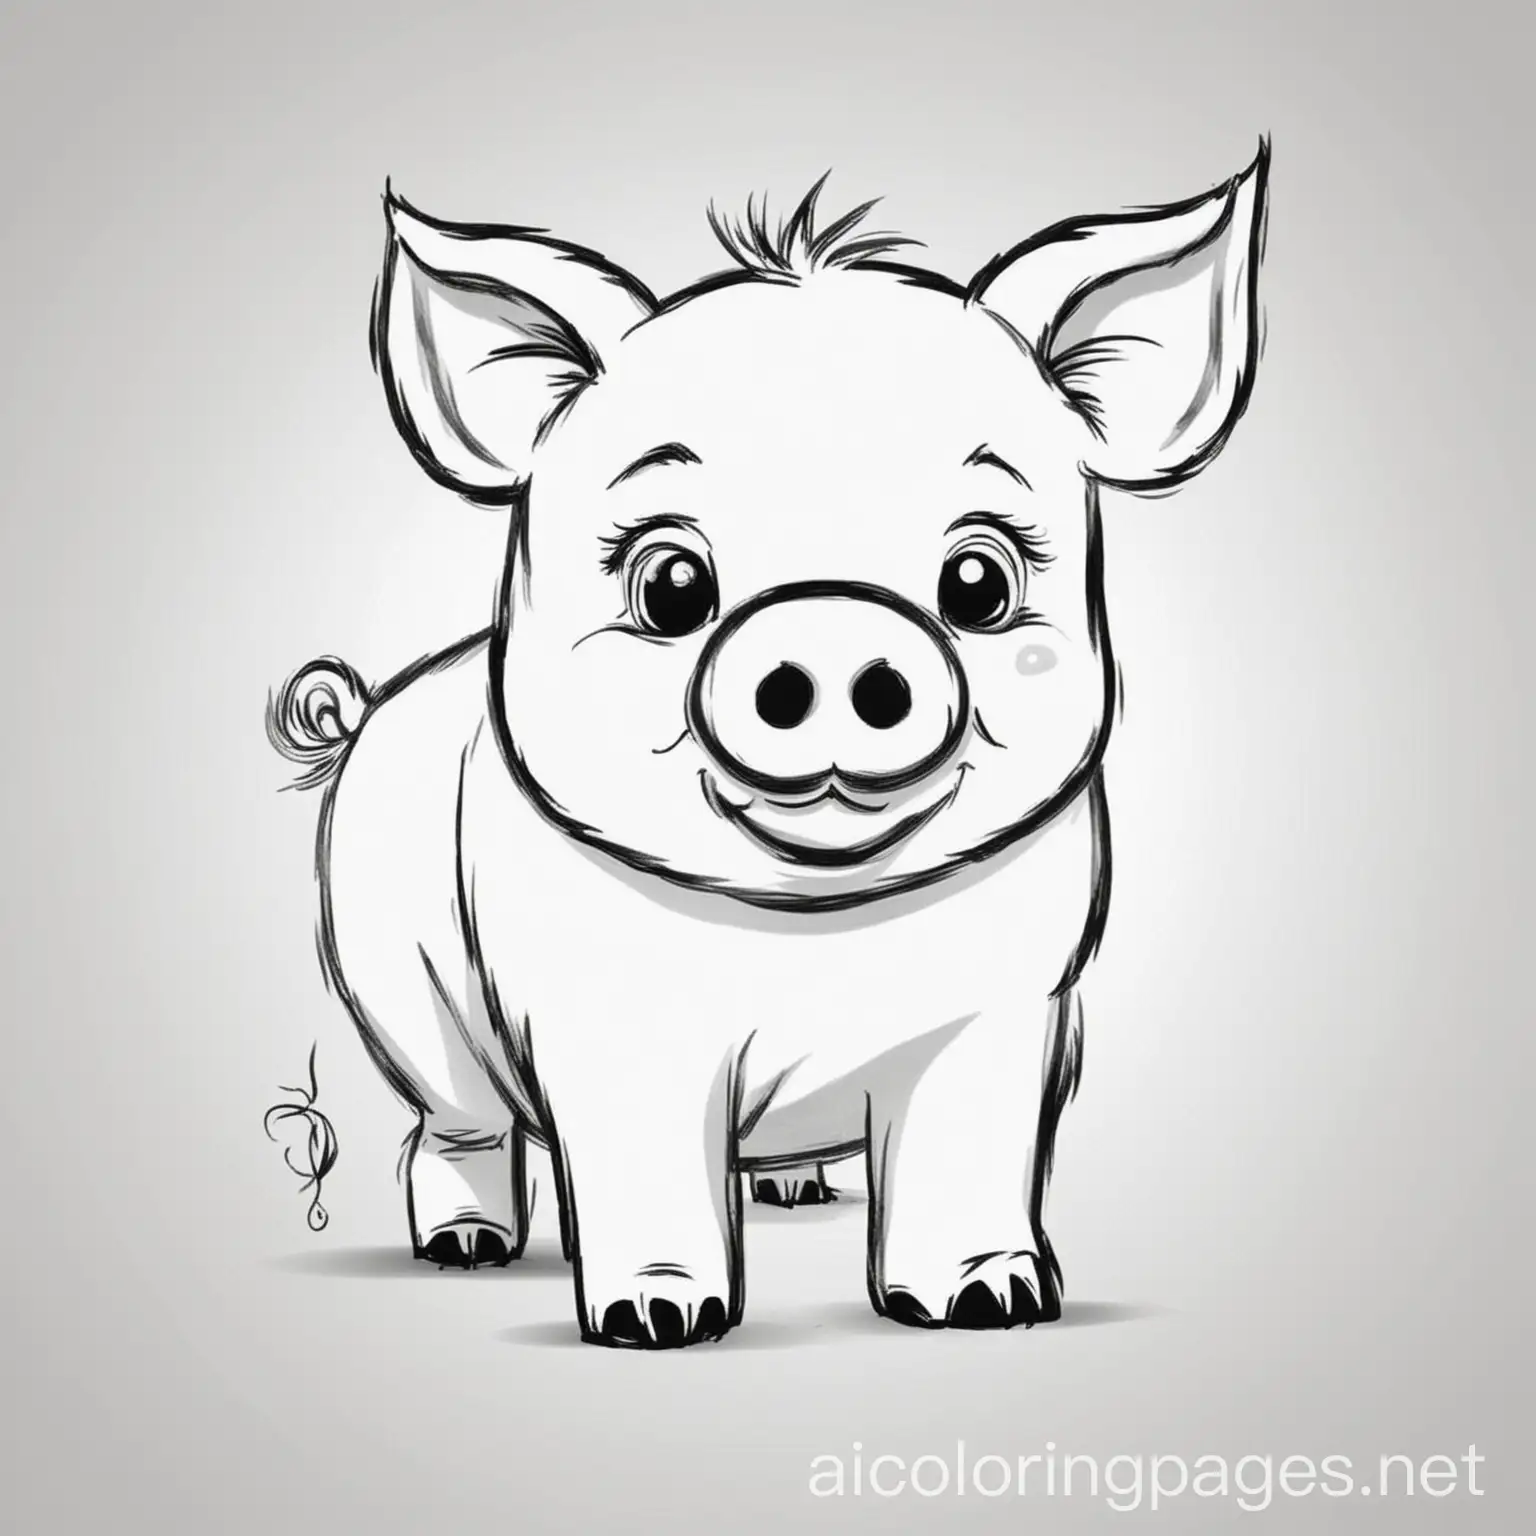 pig
, Coloring Page, black and white, line art, white background, Simplicity, Ample White Space. The background of the coloring page is plain white to make it easy for young children to color within the lines. The outlines of all the subjects are easy to distinguish, making it simple for kids to color without too much difficulty